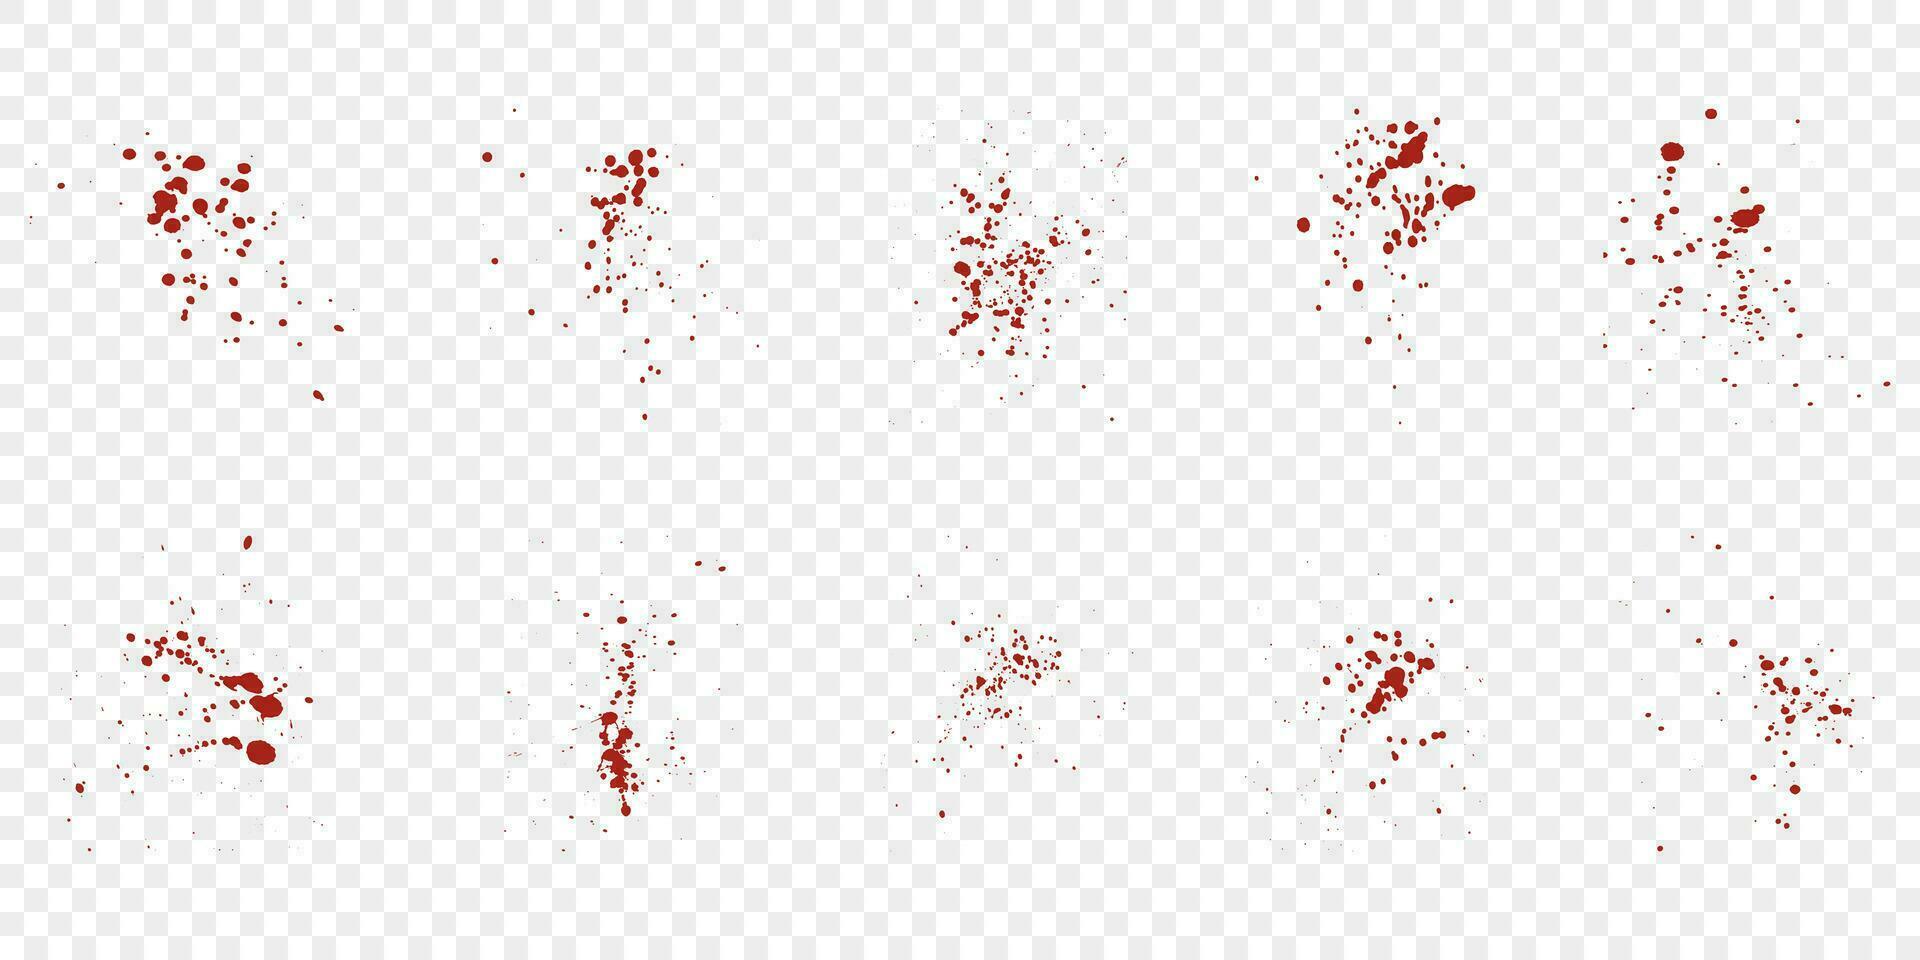 Blood Spatter Set. Red Drip Splatter. Grunge Splash Collection. Splat Pattern on Transparent Background, Paint Ink Stain Texture. Abstract Design, Messy Bloodstain. Isolated Vector Illustration.